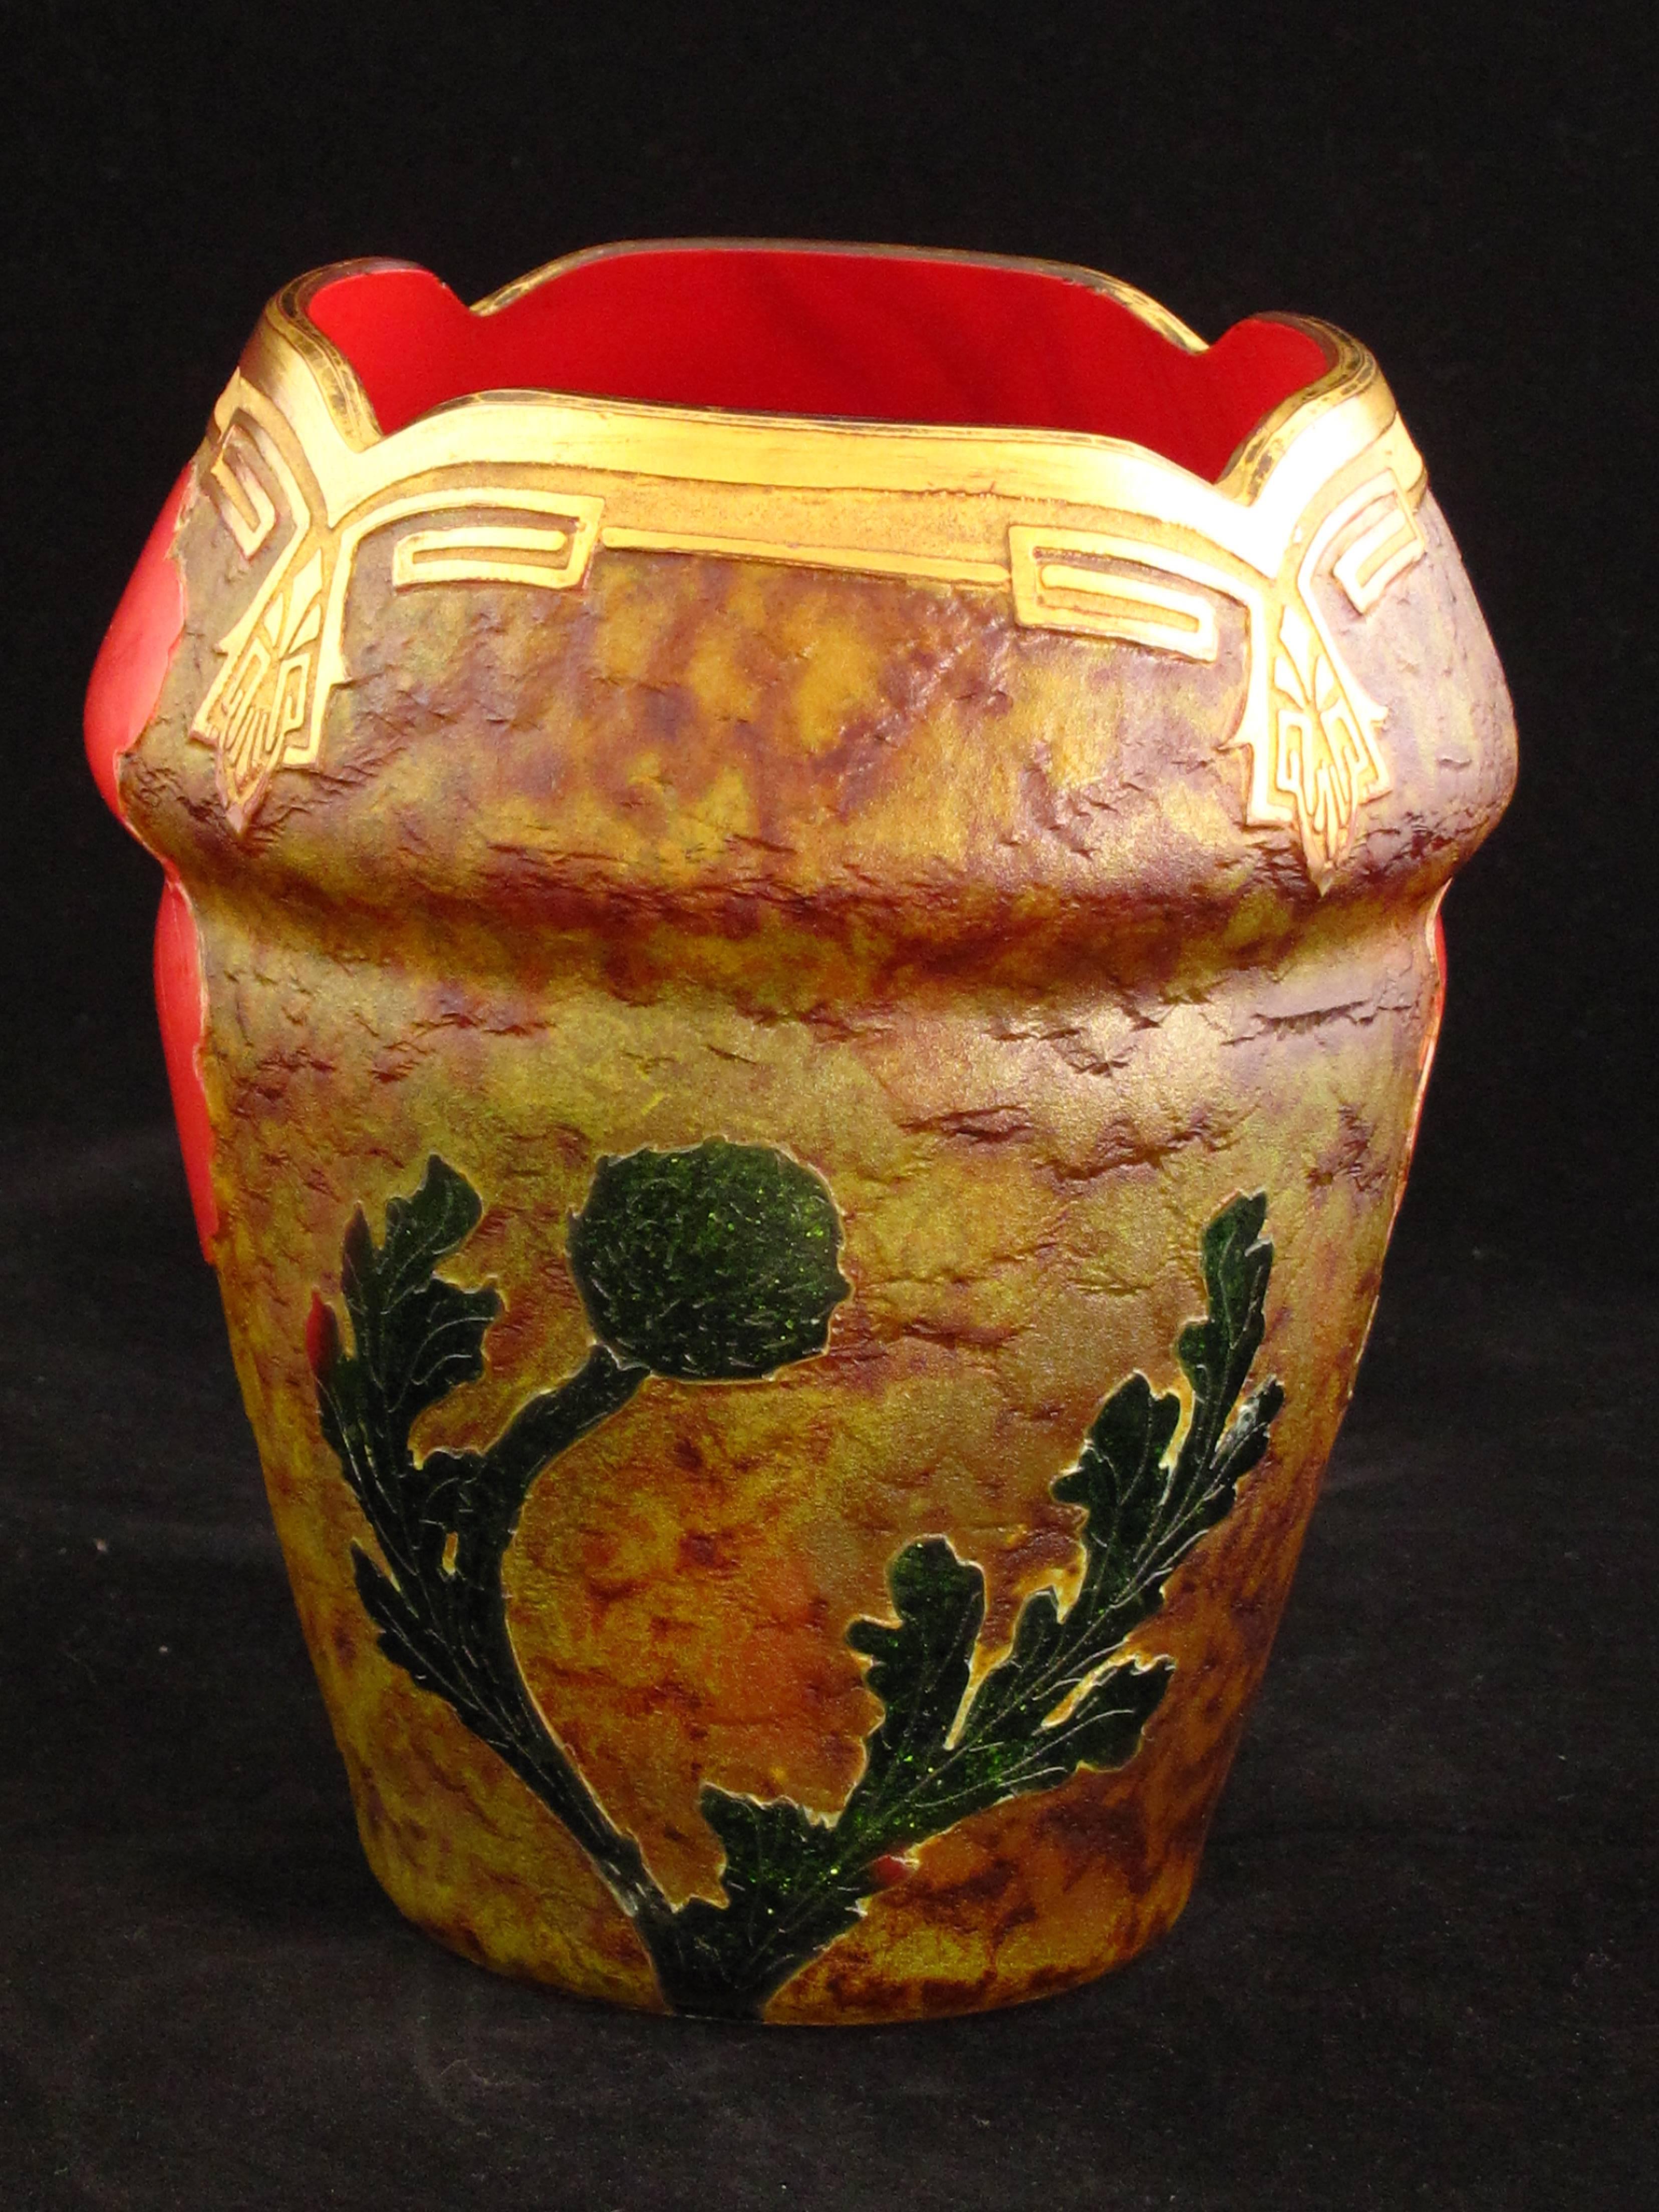 A Legras vase in the Indiana pattern. Signed 'Indiana' and L& Cie to underside. Stunning cameo glass vase with red poppies and aventurine leaves. Highlighted with gilt. Approximate 15 cm tall, French, circa 1900. Very detailed work and a superb